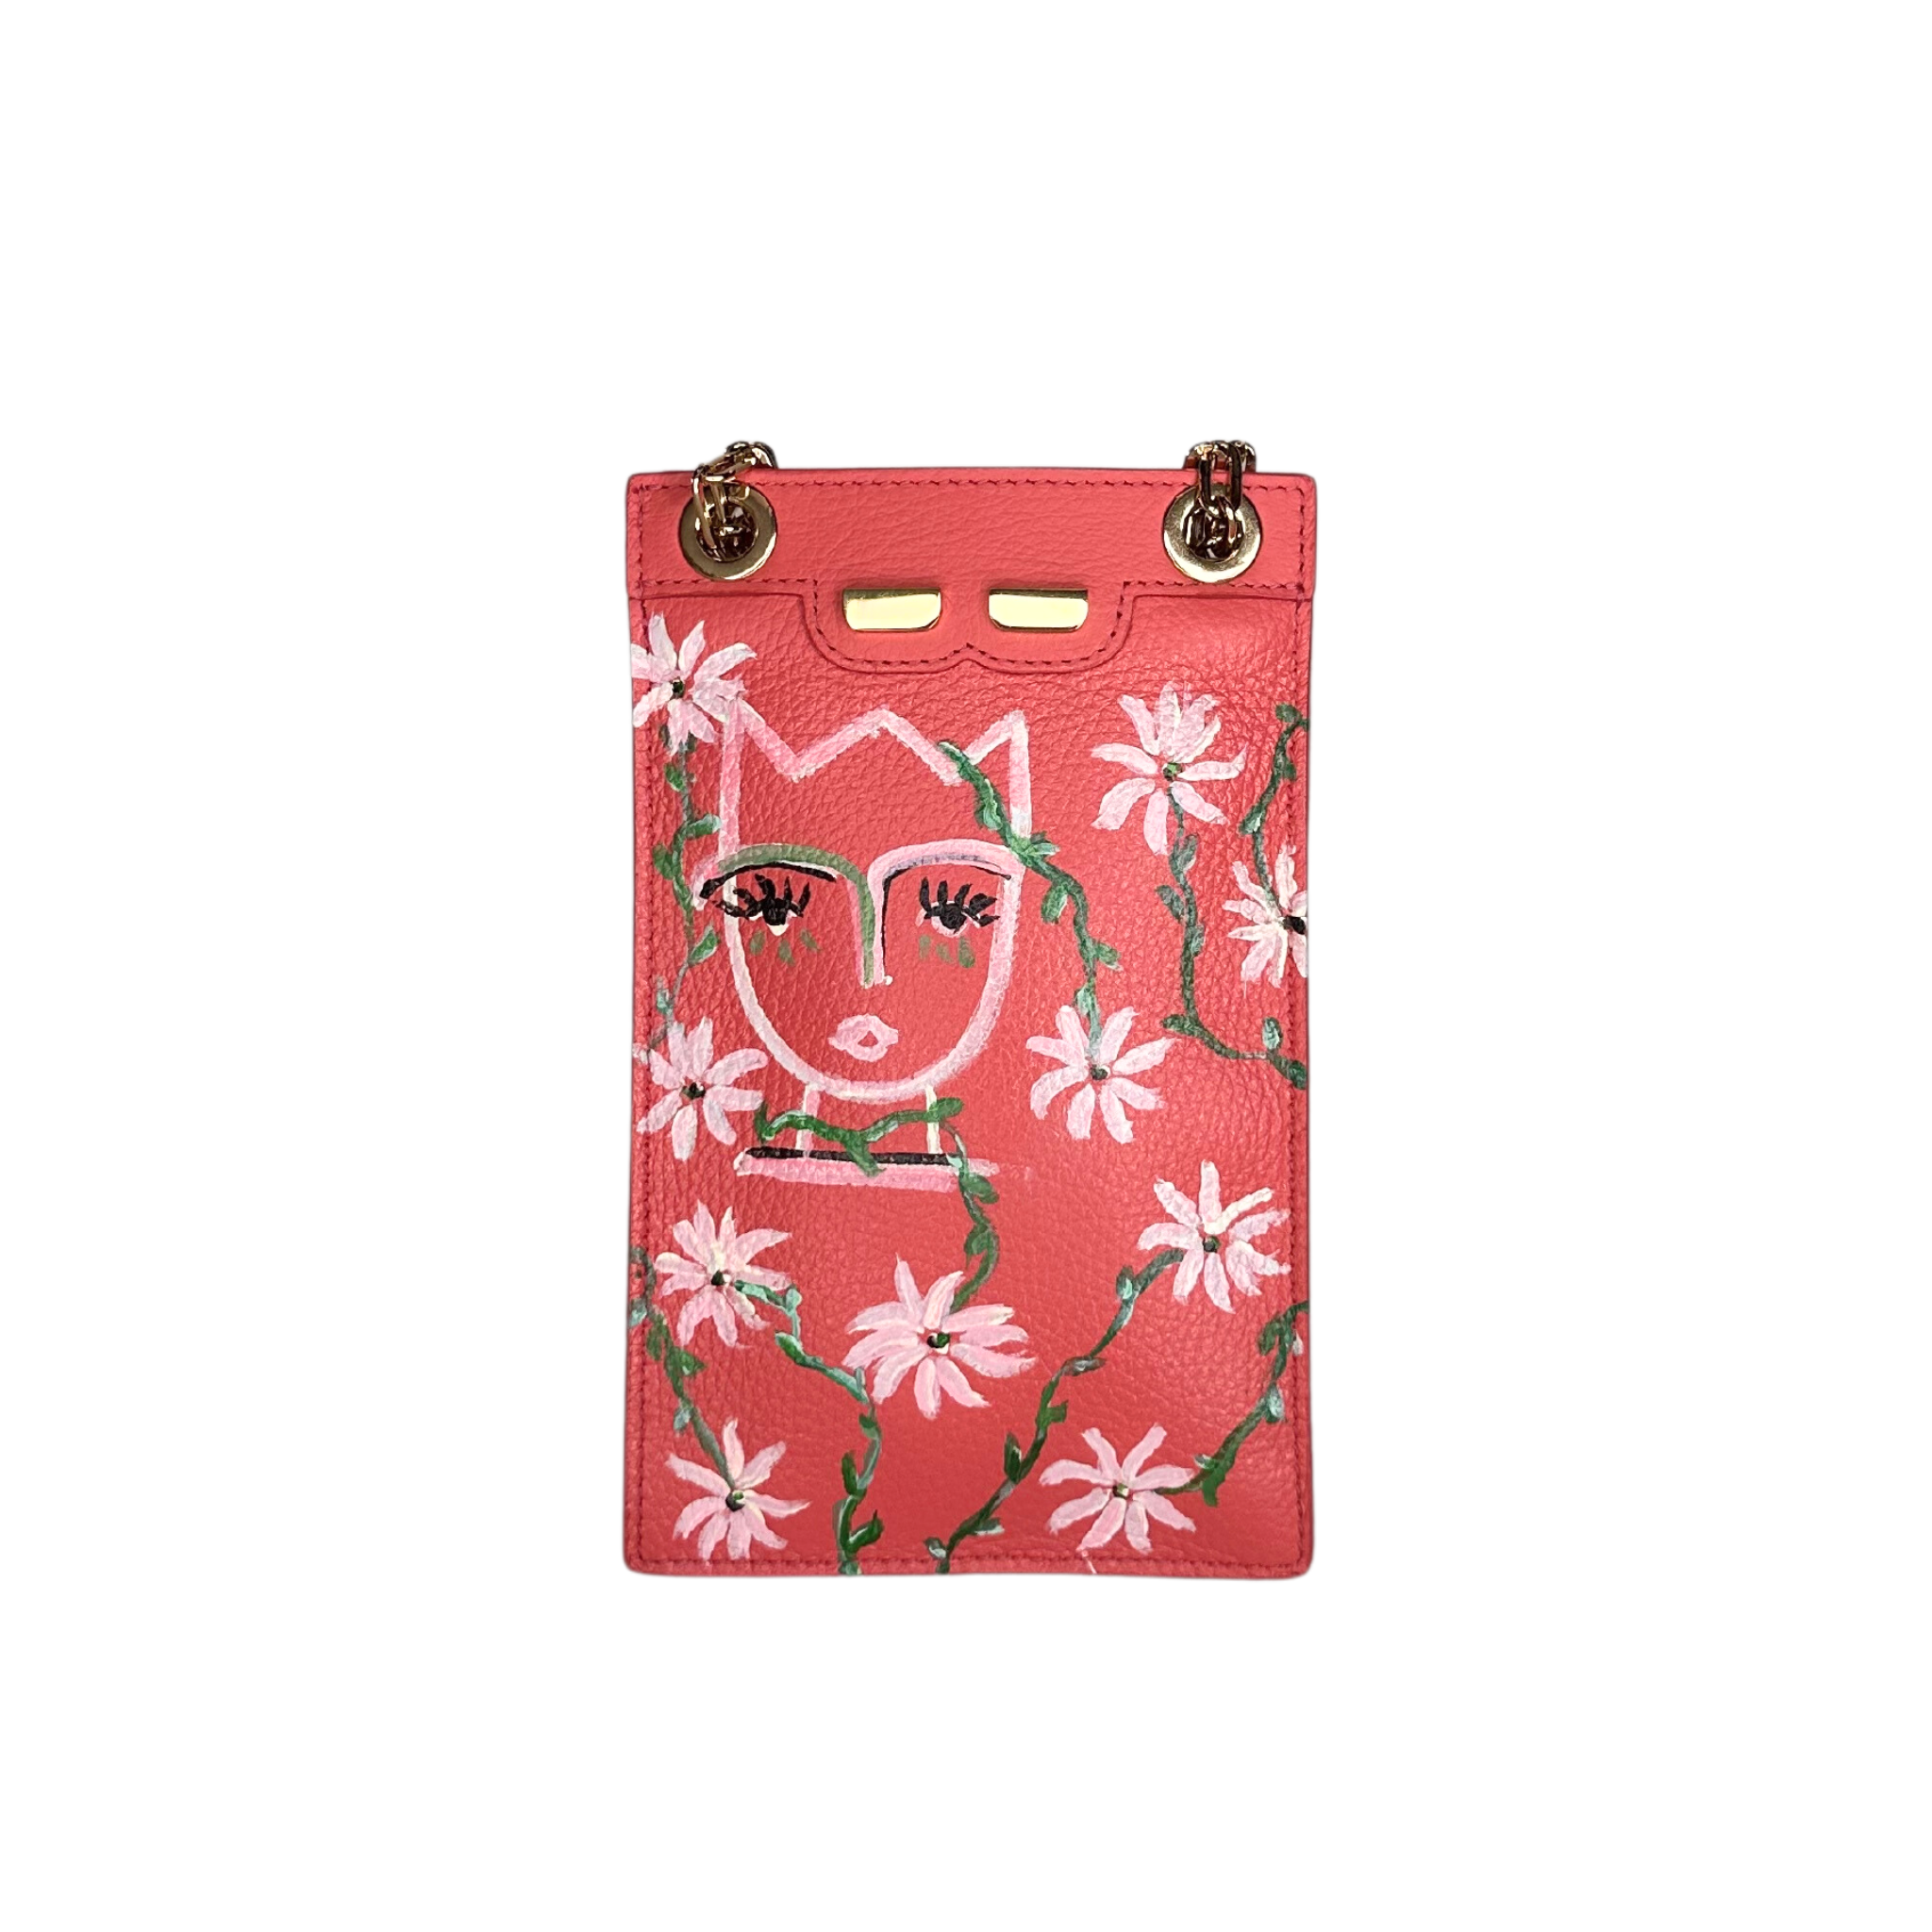 Catherine Cellphone Pouch in Rosa